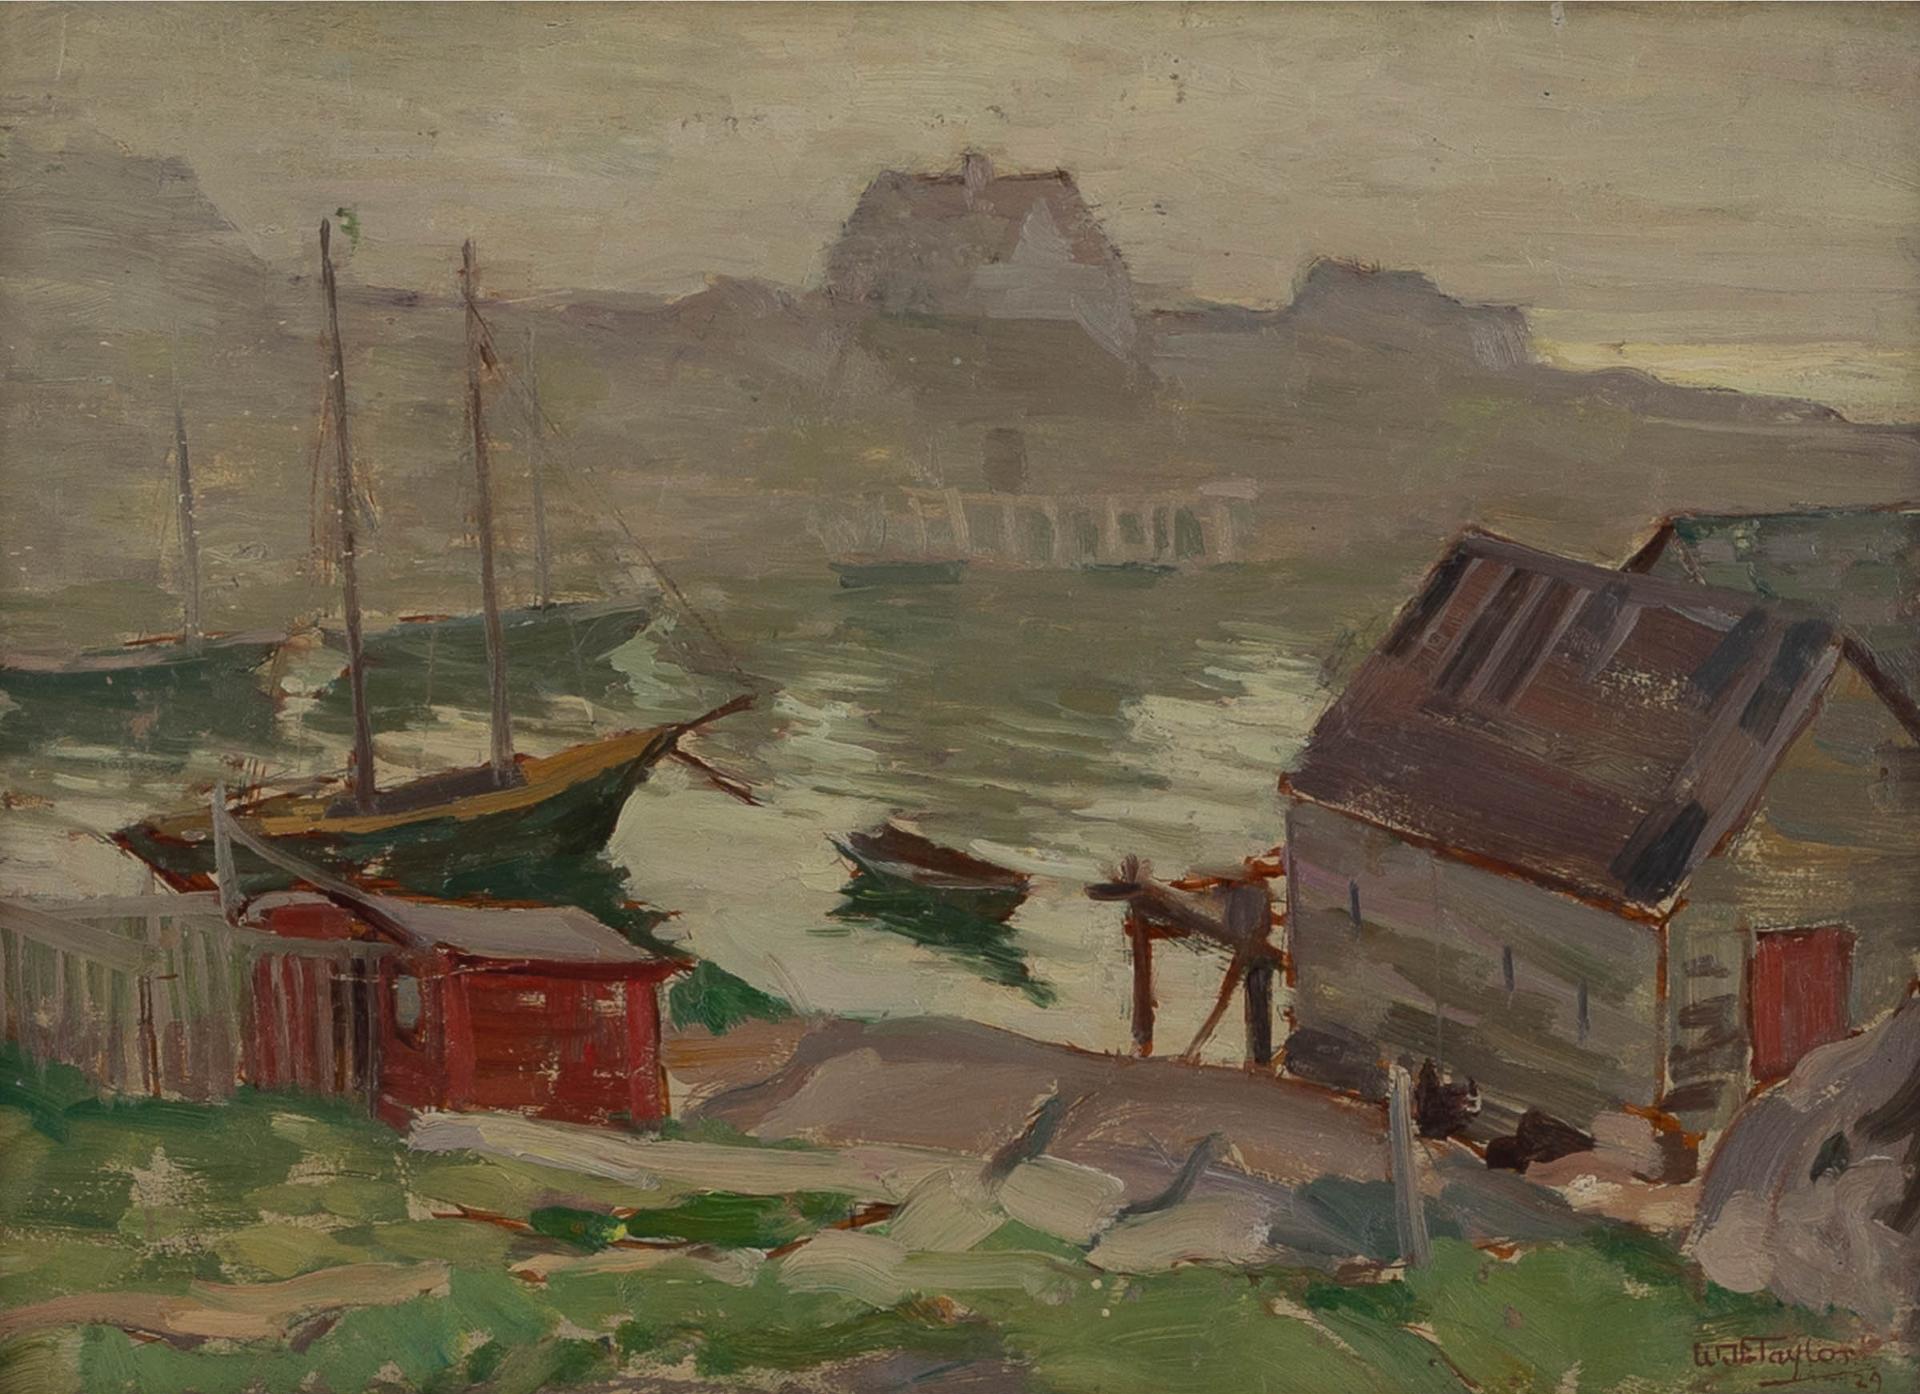 William Hughes Taylor (1891-1960) - Harbour, Lifting Fog, Peggy's Cove N.S, 1929